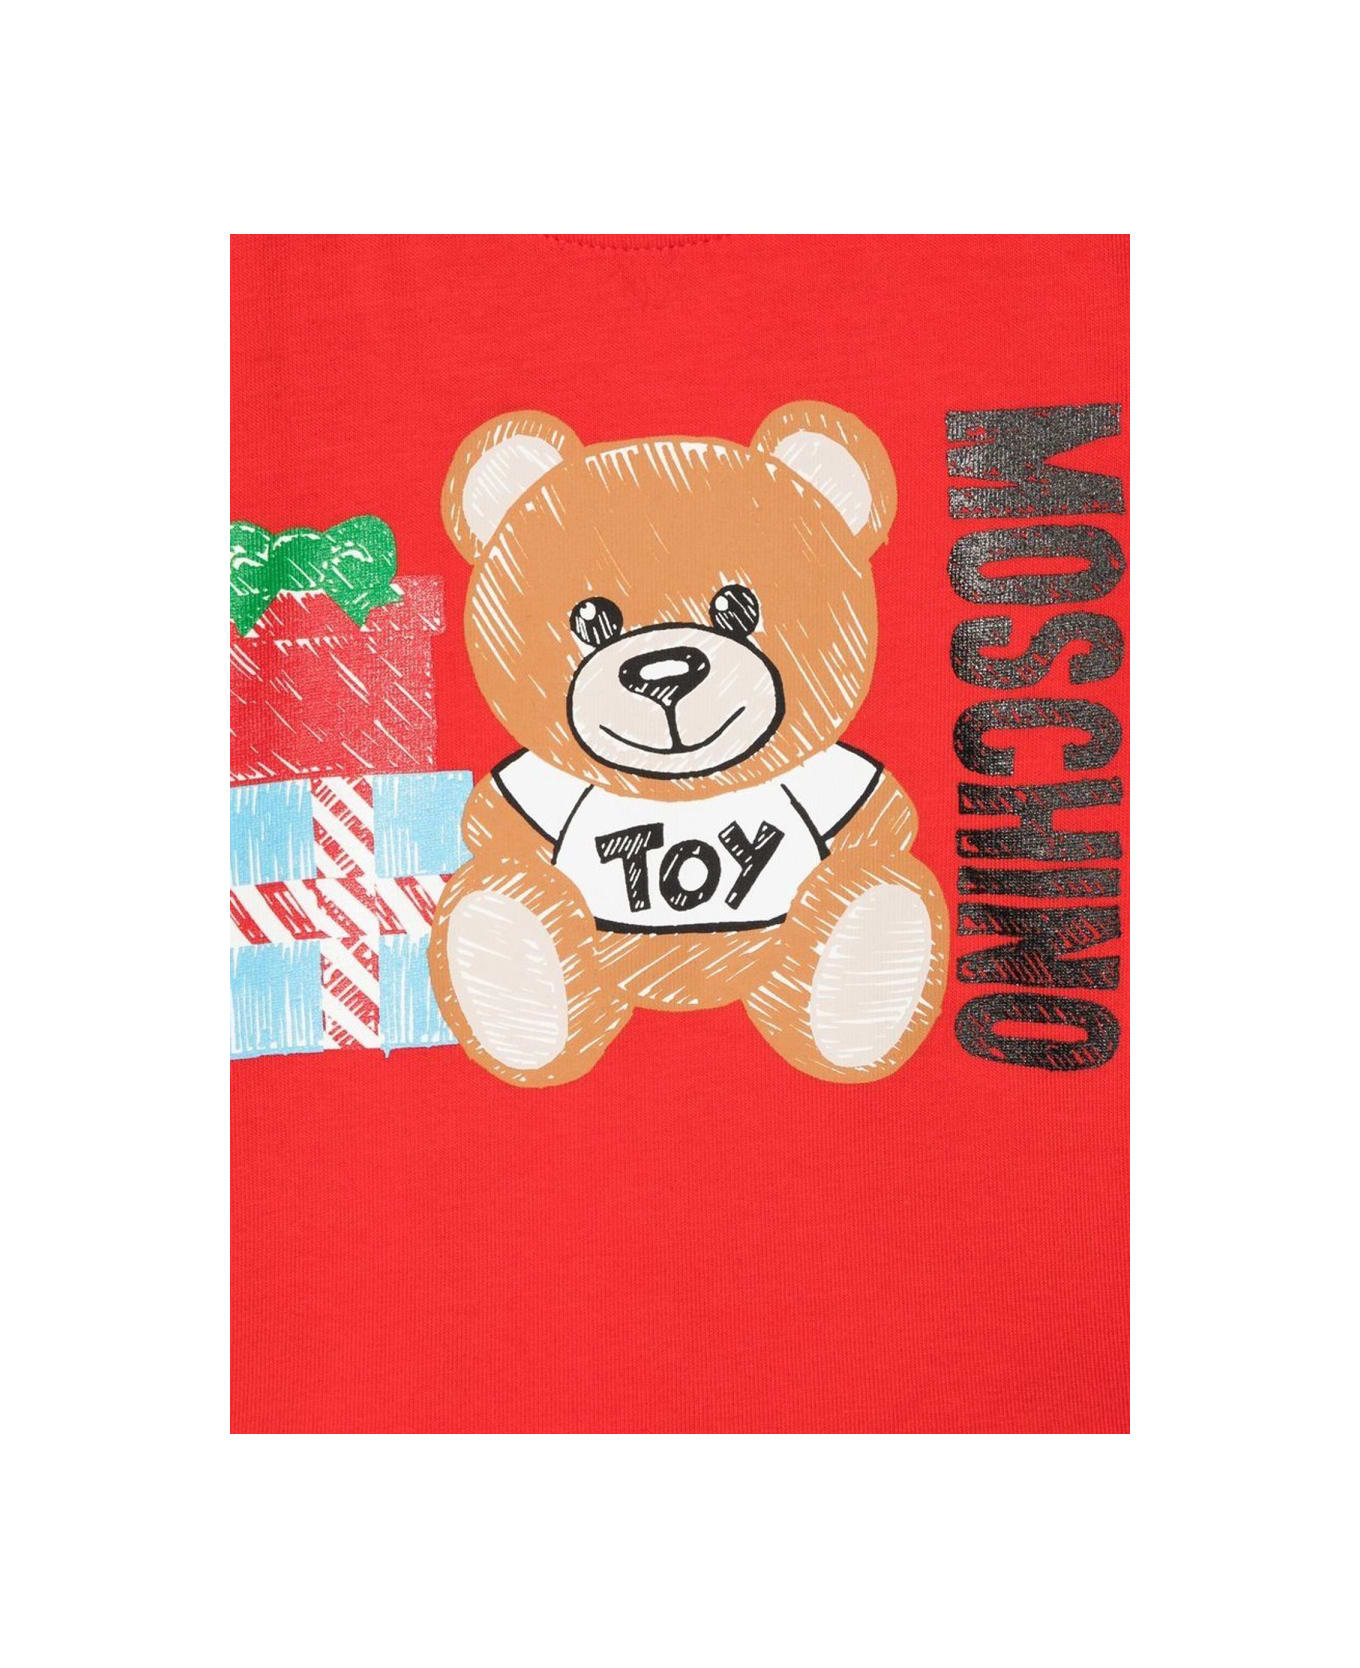 Moschino T-shirt M/l Teddy Bear Gifts - RED Tシャツ＆ポロシャツ